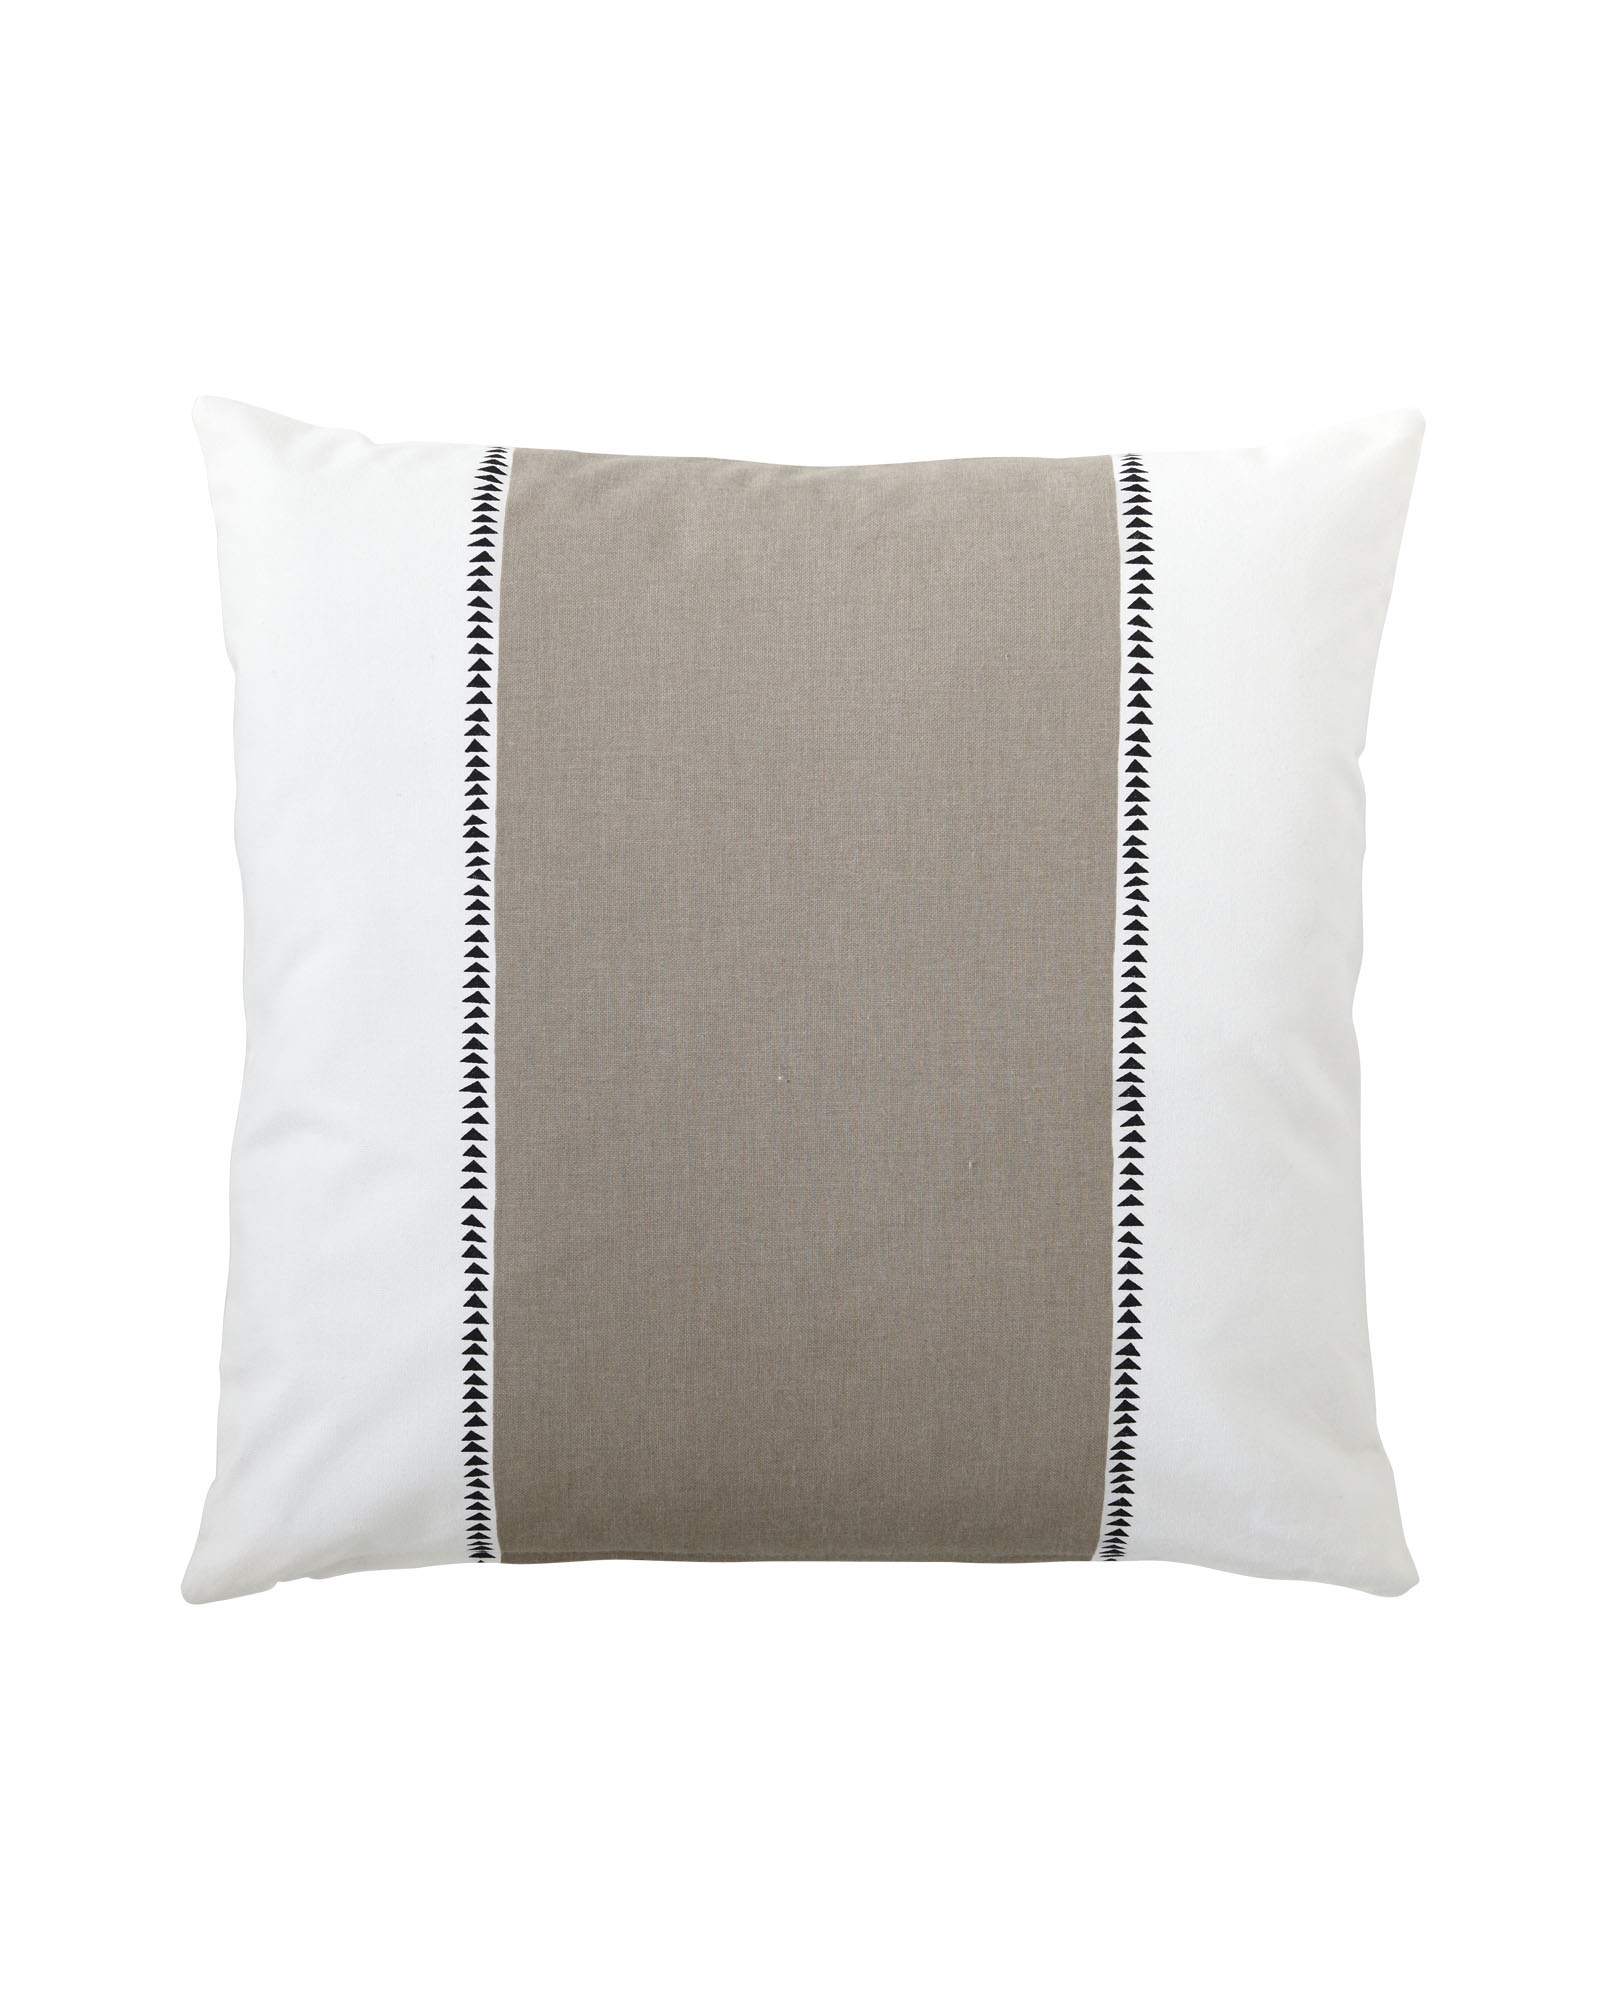 Racing Stripe Pillow Cover - Image 0